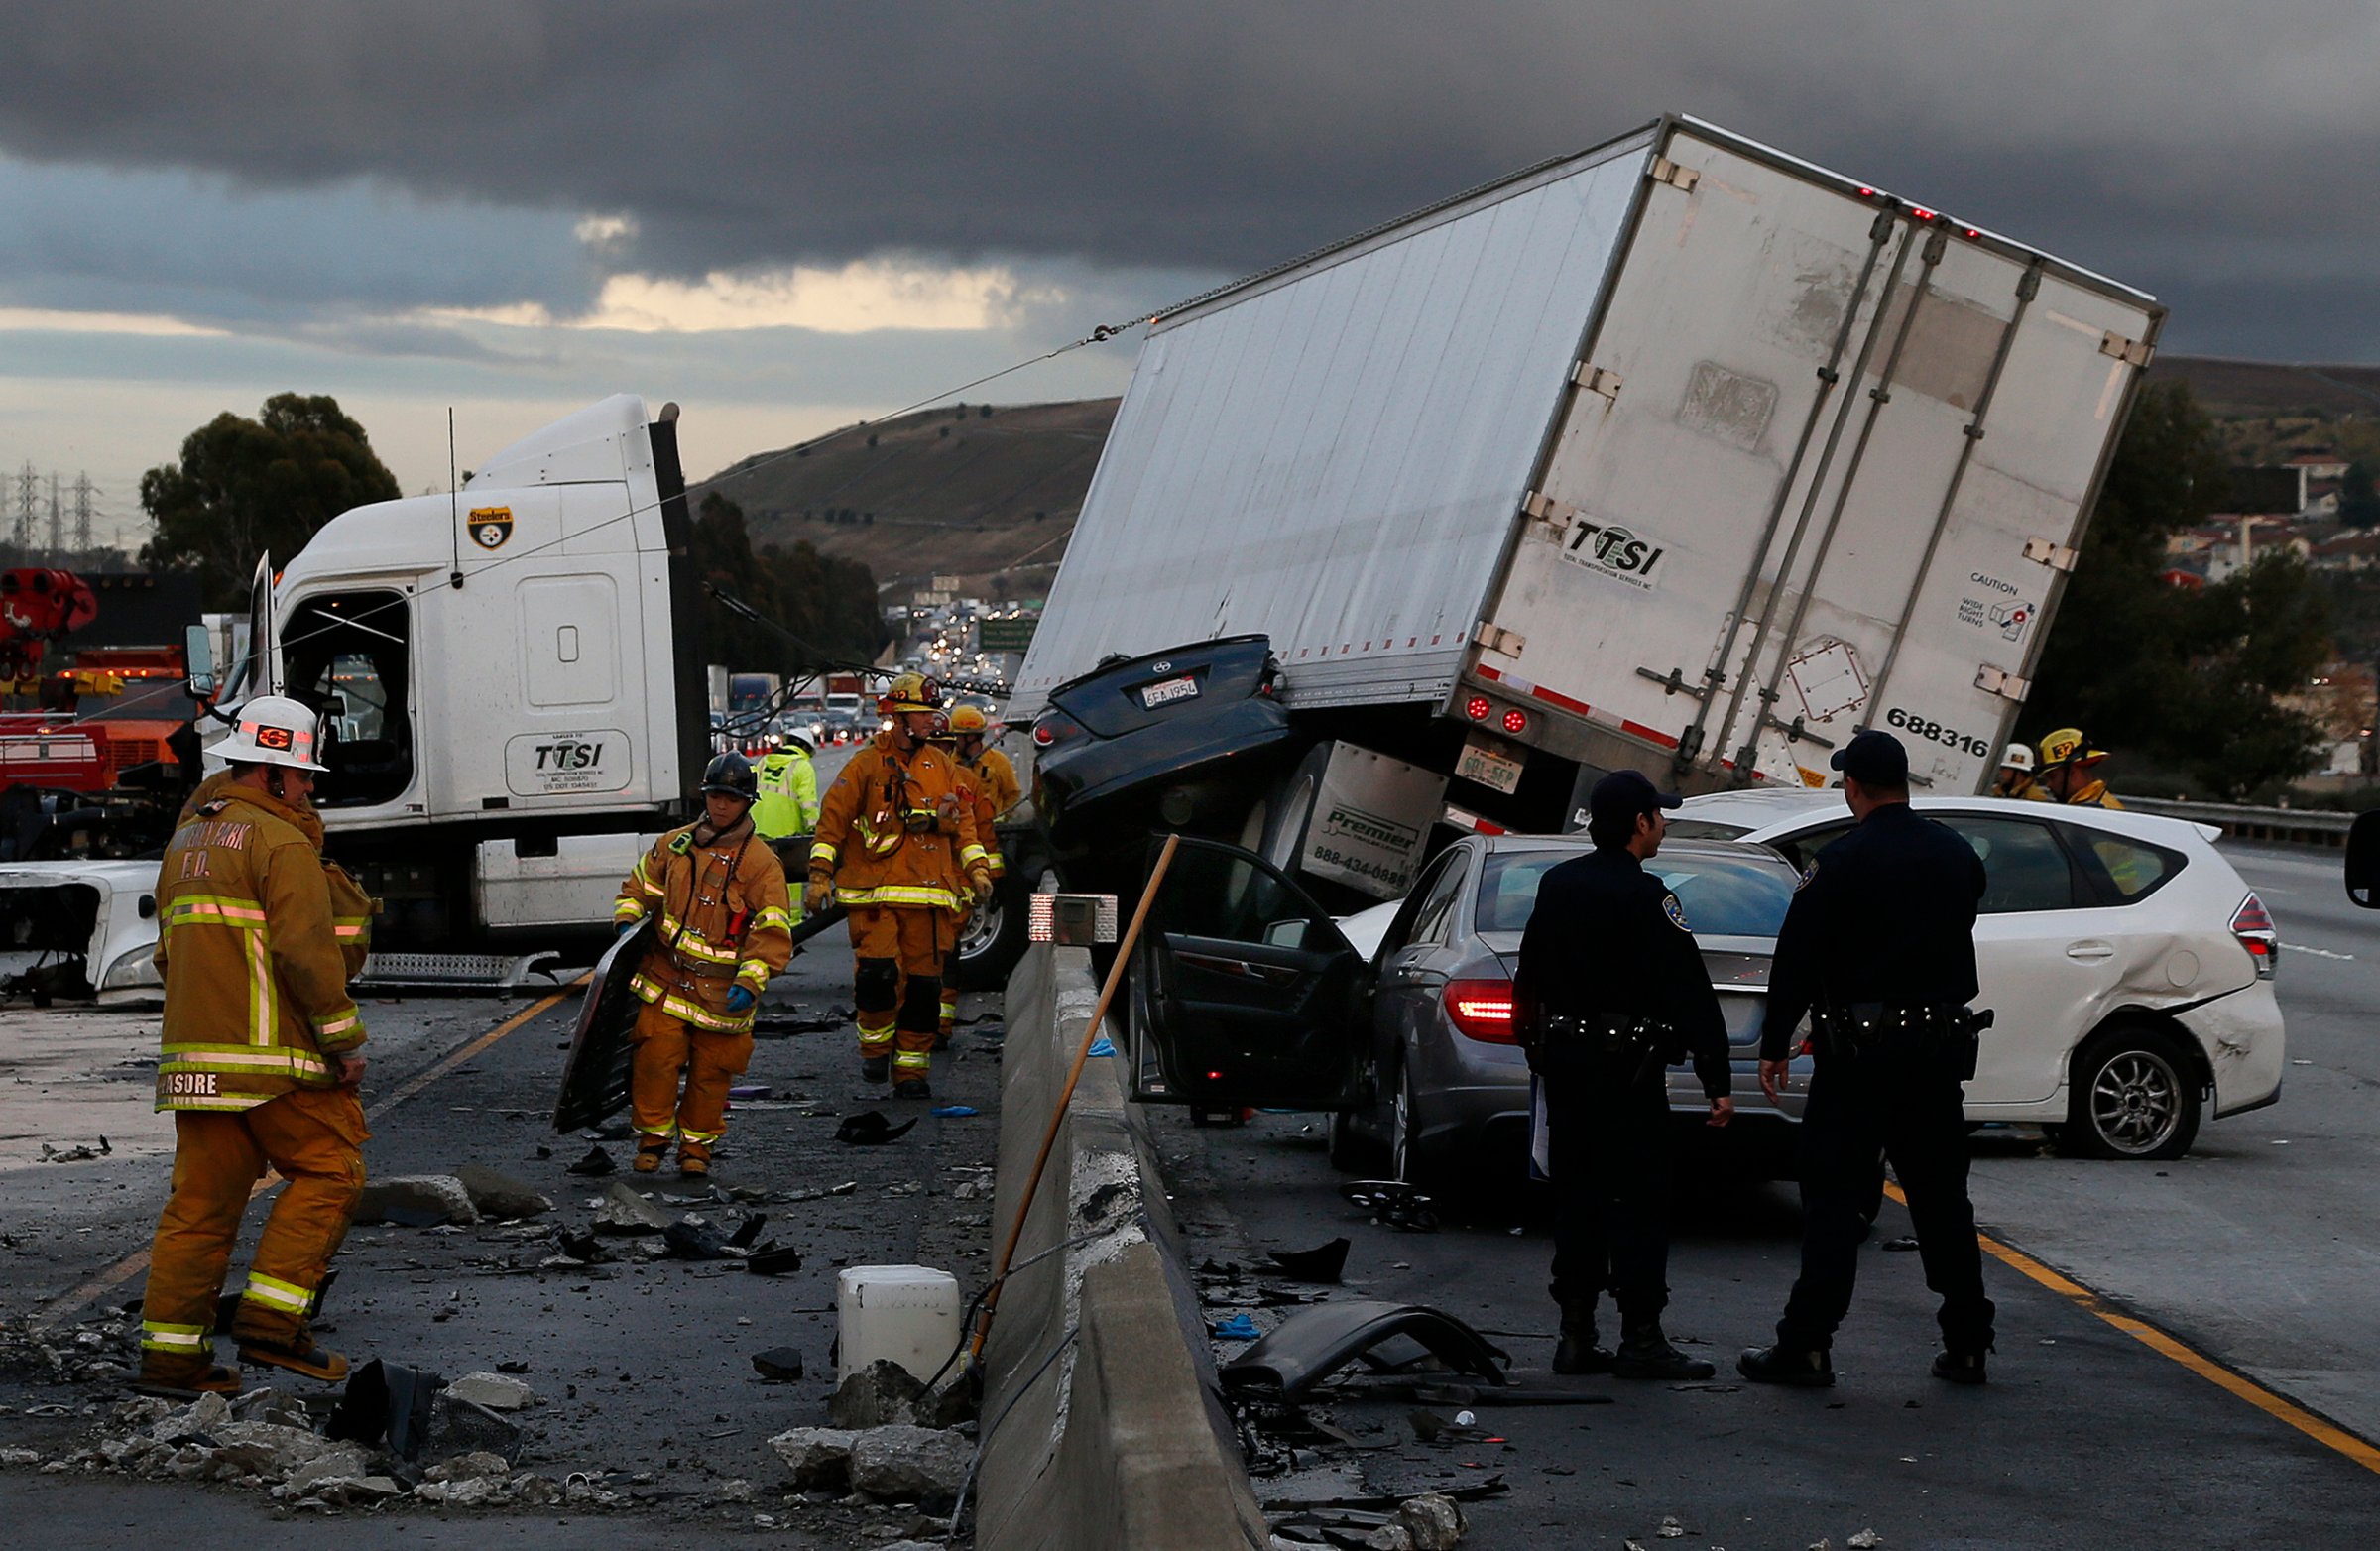 Firefighters and rescue personnel are on scene after a big rig crashed through the center divider crushing a car underneath and causing four other vehicles to collide on the rain slicked 60 freeway near the Garfield Exit in Monterey Park, Calif. on January 5, 2016.